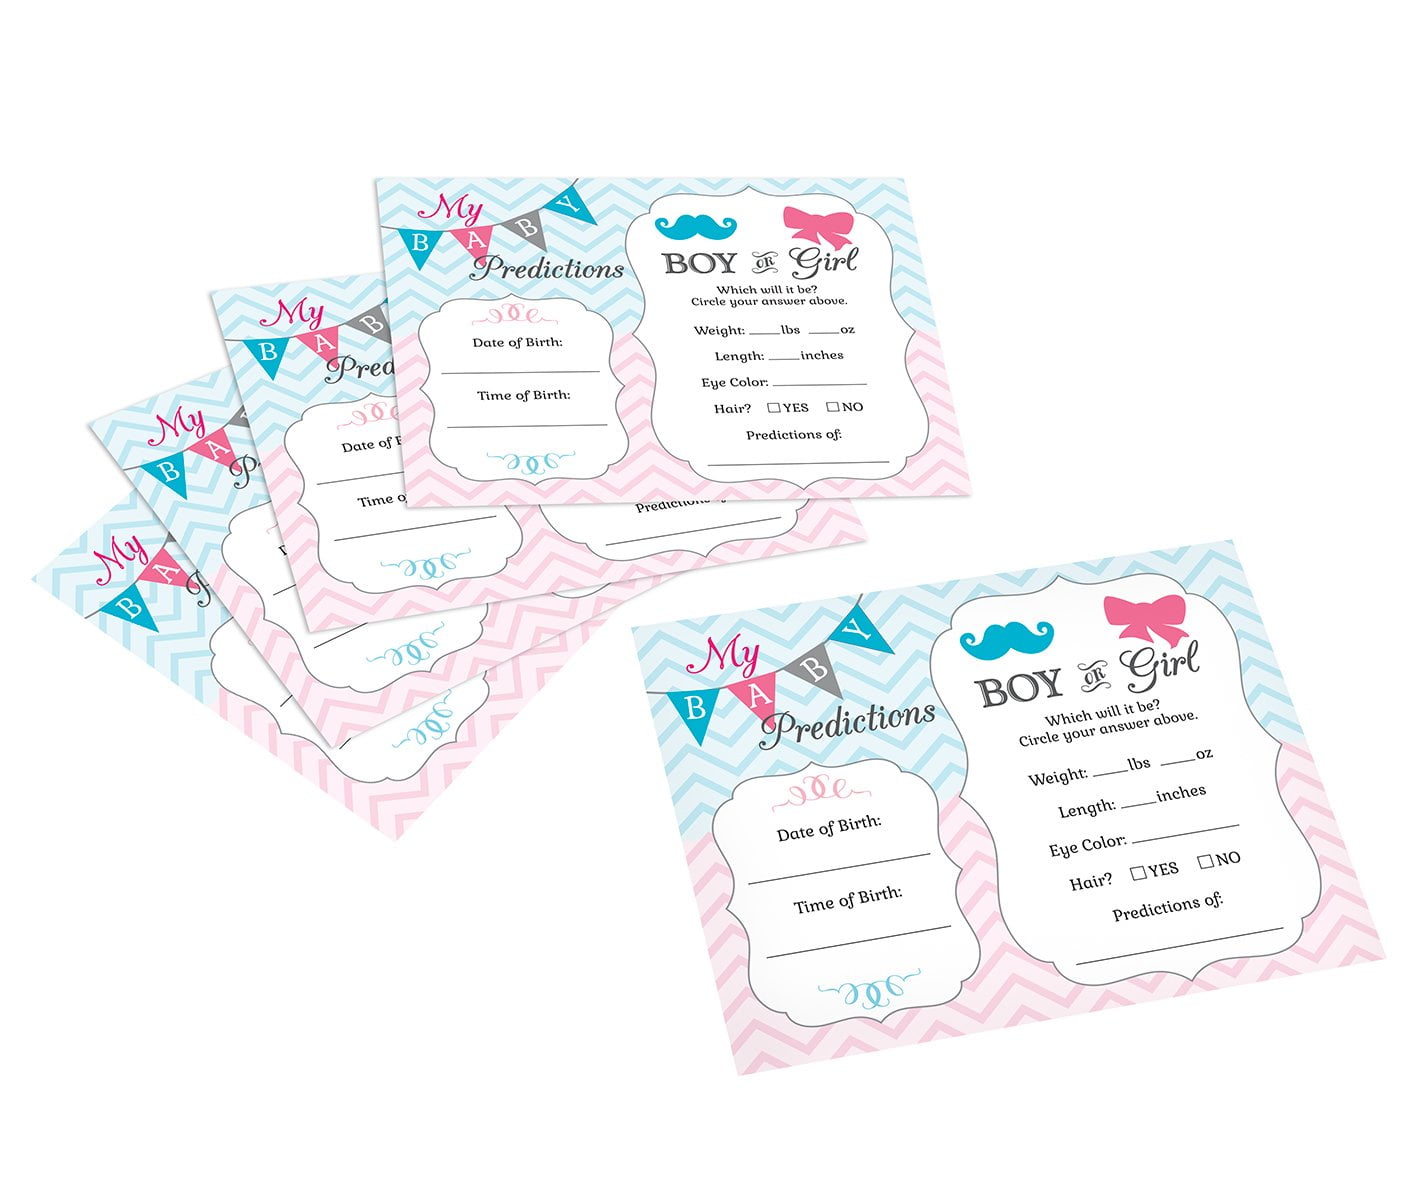 lillian-rose-baby-gender-reveal-prediction-cards-pink-blue-white-5-5-x-4-25-walmart-canada